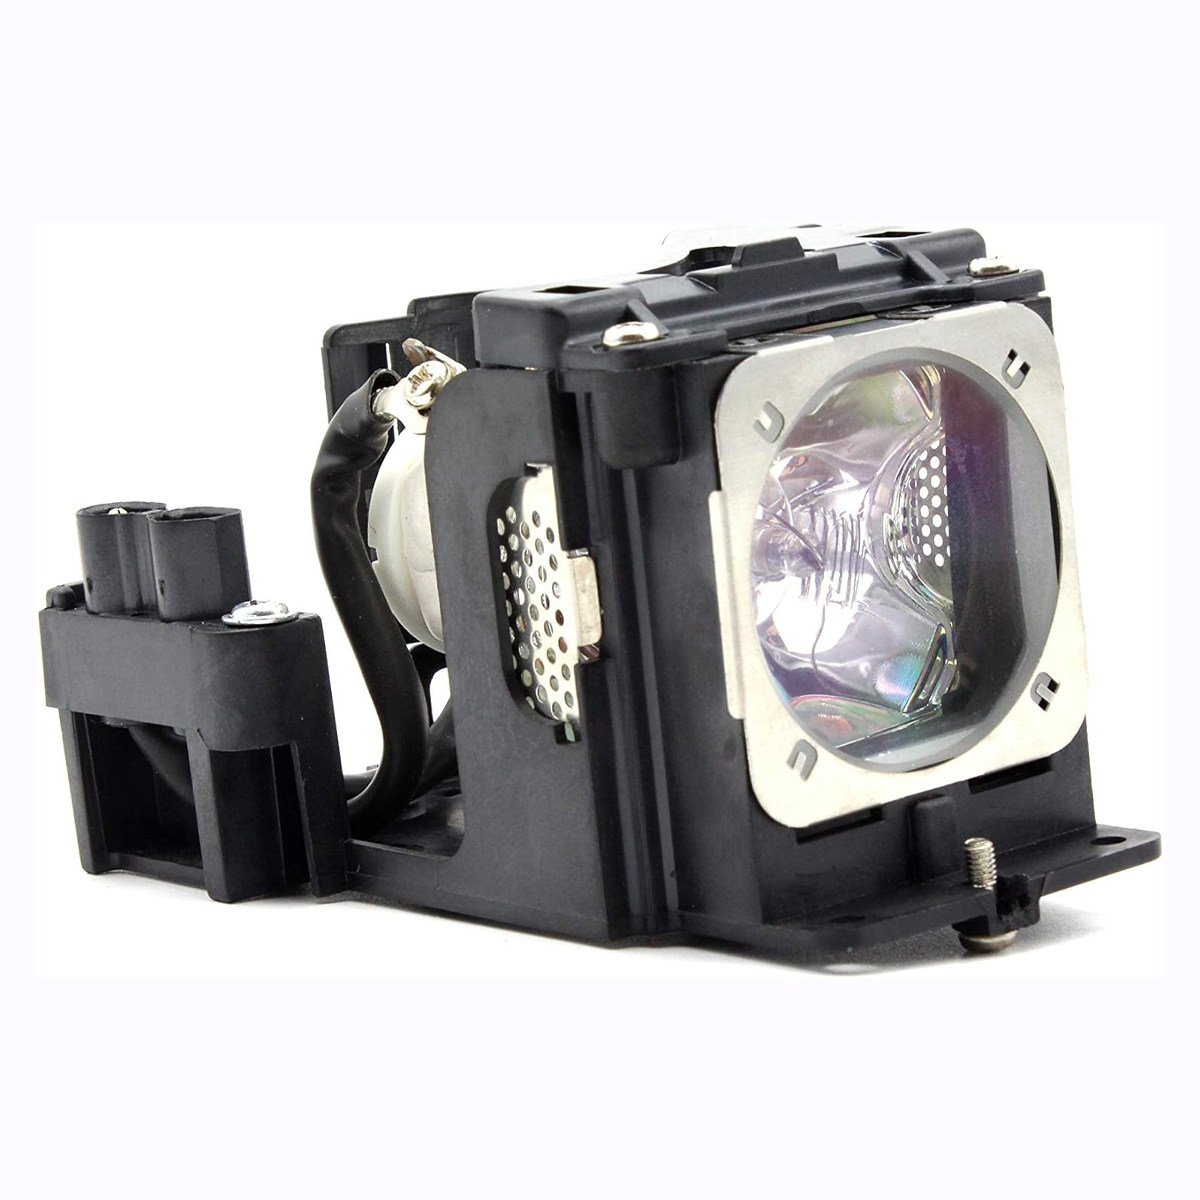 Replacement Projector lamp POA-LMP102 For Sanyo SANYO PLC-XE31